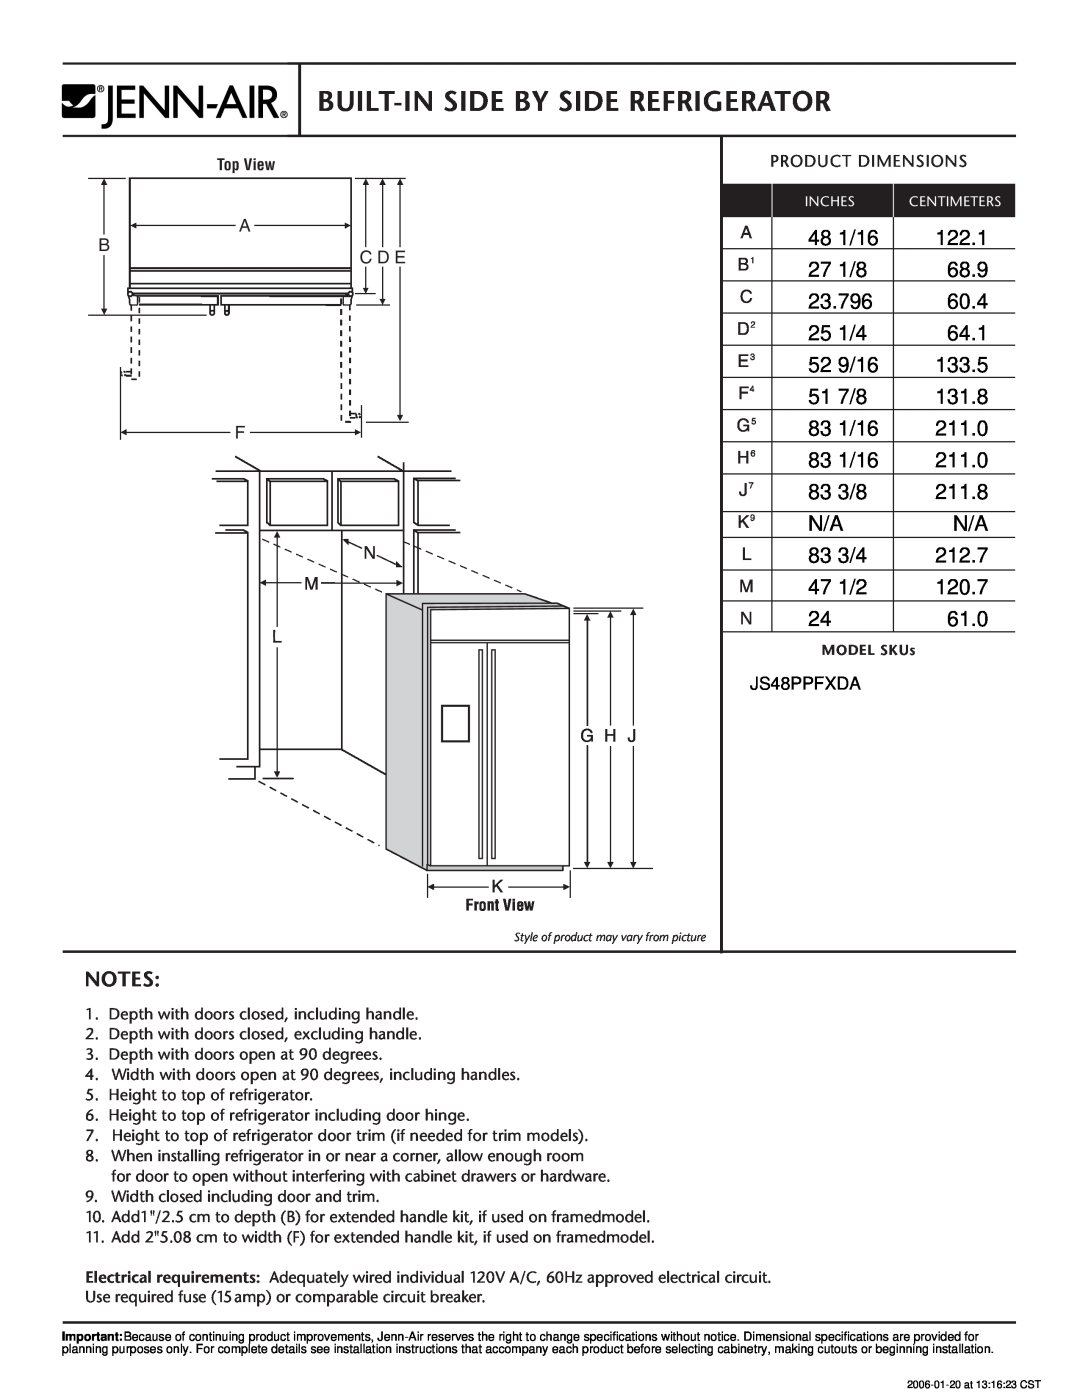 Jenn-Air JS48PPFXDA dimensions Built-In Side By Side Refrigerator, Product Dimensions 